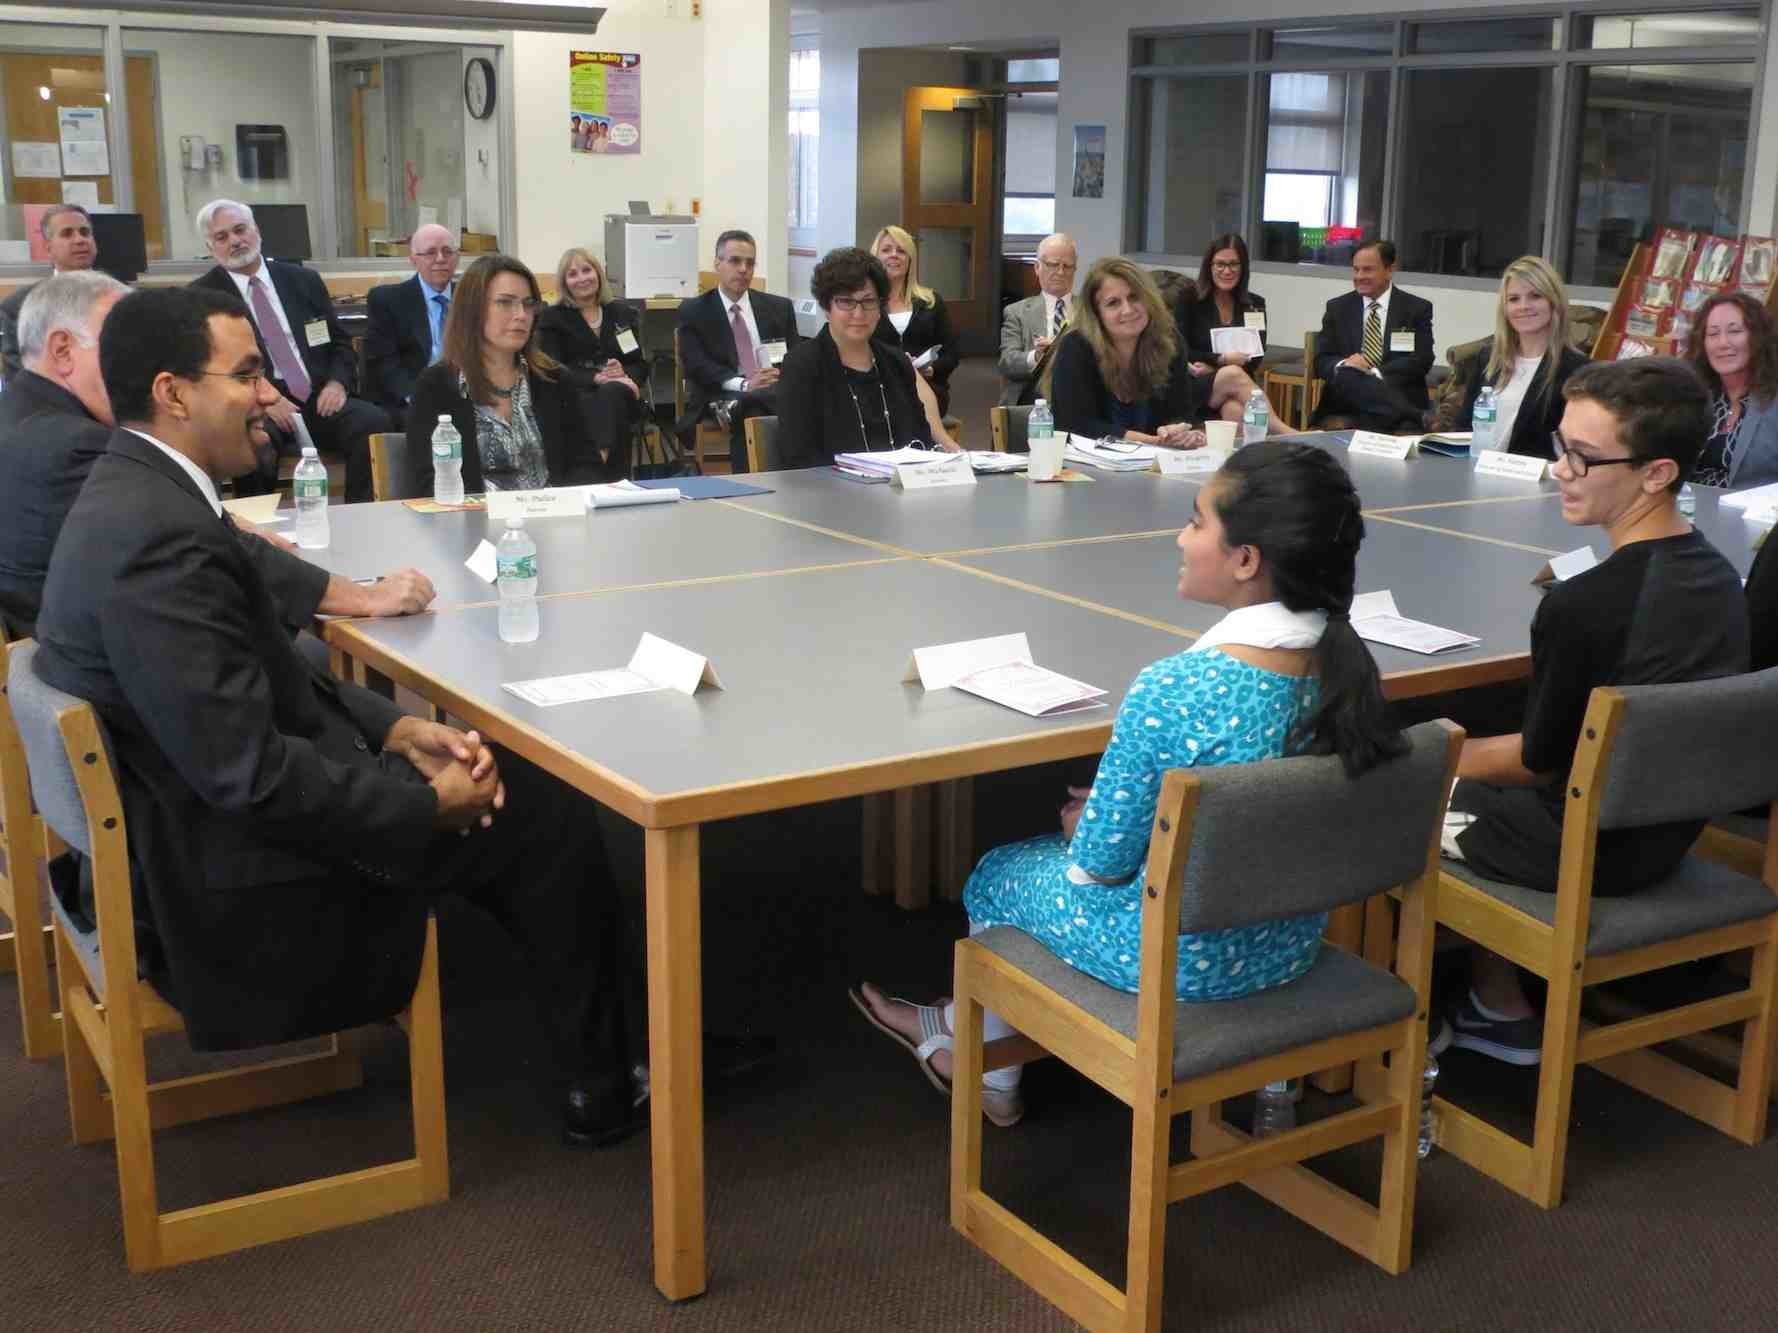 After a round-table discussion with East Meadow School District administrators, teachers, parents and students on Oct. 2 at Clarke, State Education Commissioner Dr. John King Jr. lauded the school for its interdisciplinary collaboration.